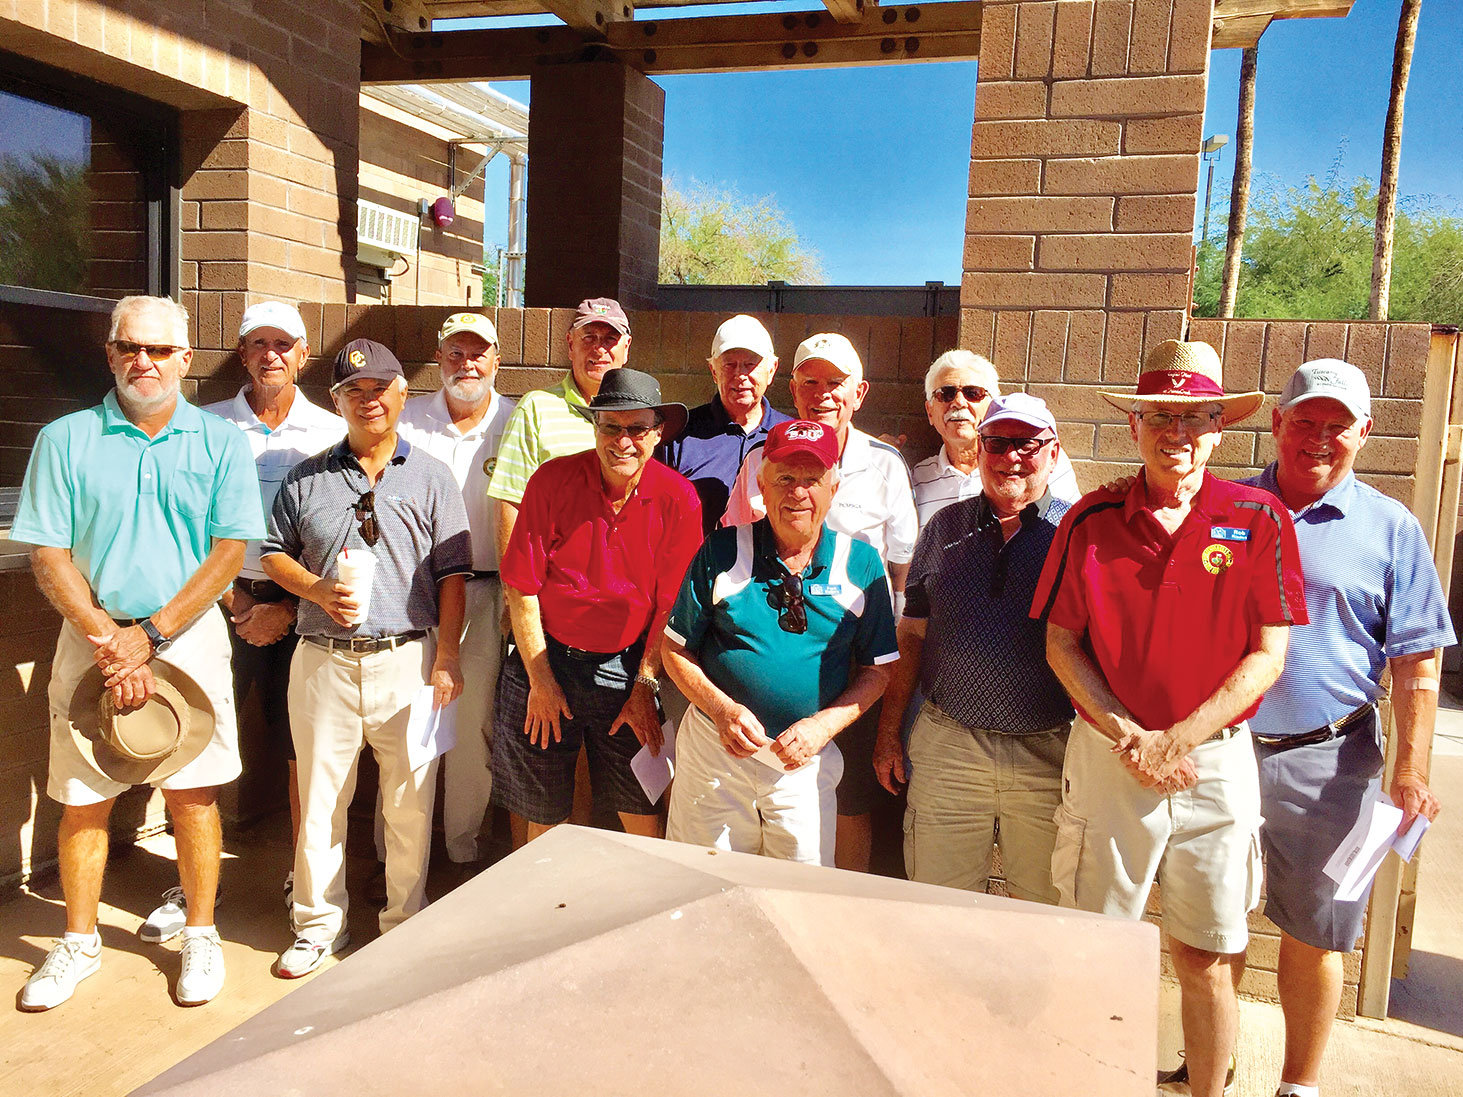 All Winners – PCM9GA Falcon Dunes Tournament, left to right: Connie Neeley, Tom Pizzello, Kent Chu, Clint Alston, Mark Gouronc, Greg Harris, Brad Hedien, Frank Rodgers, Lee Ayers, Josh Rabinowitz, Jim Stack, Rob Risden and Greg Ray